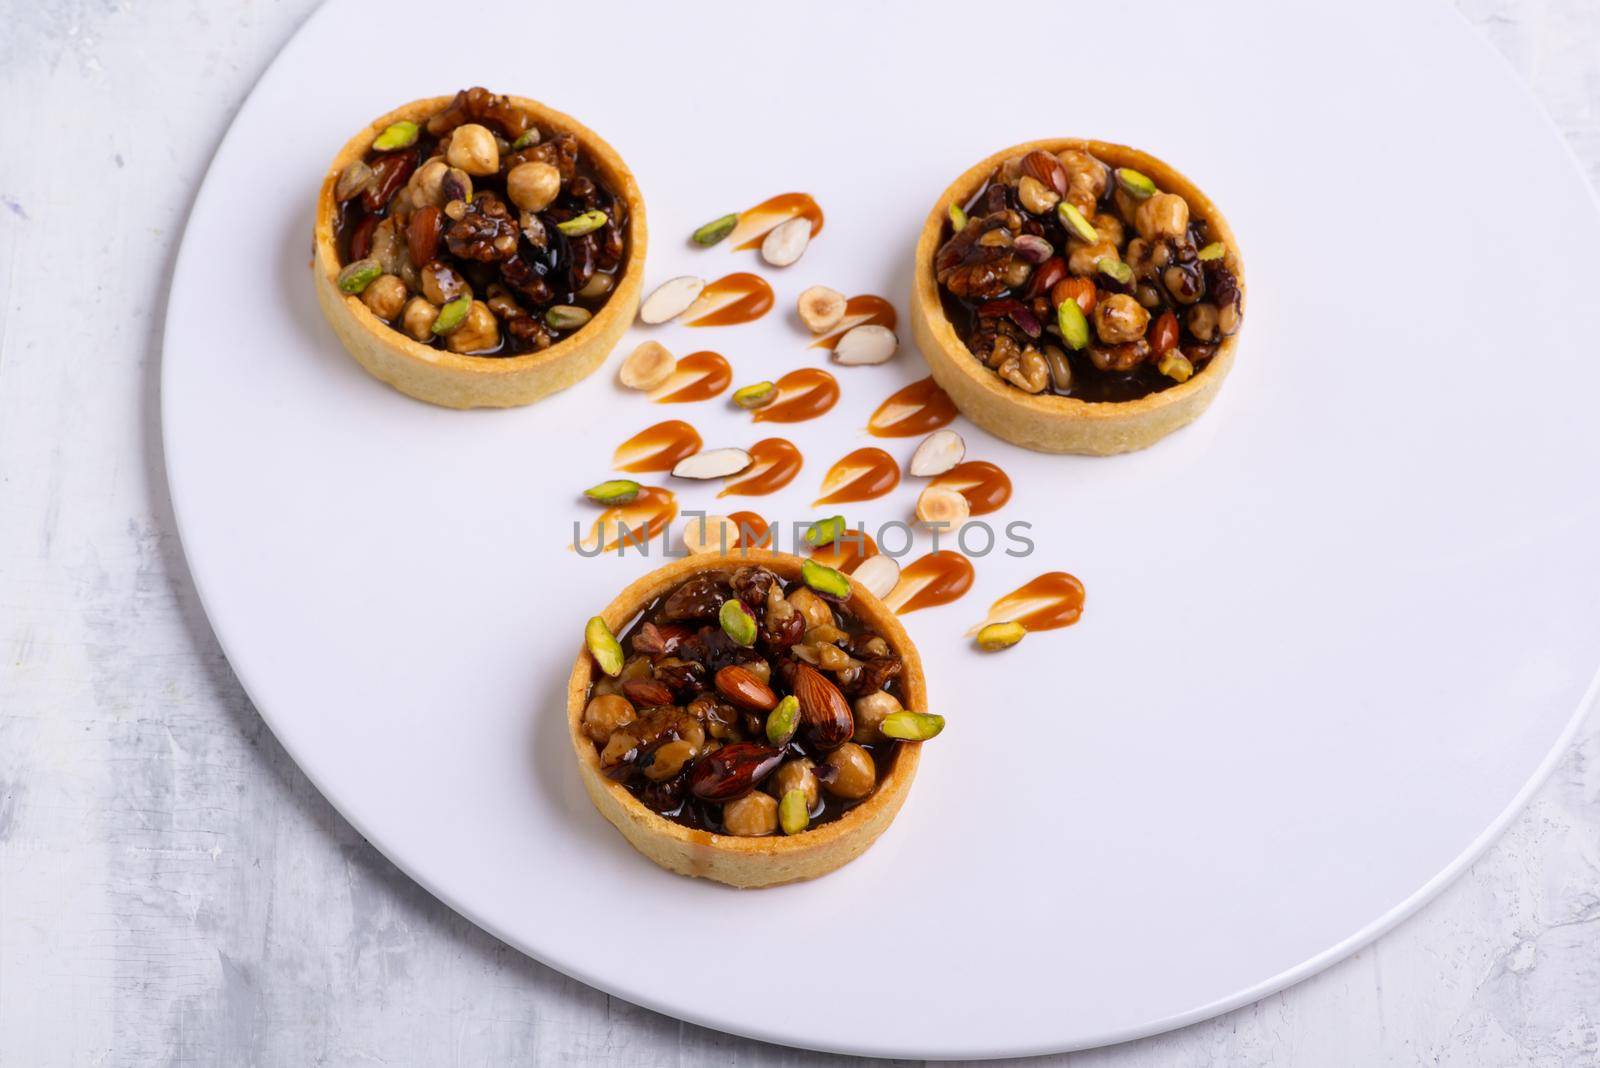 The appetizing tartlets stuffed with hazelnuts walnuts covered with a layer of liquid caramel